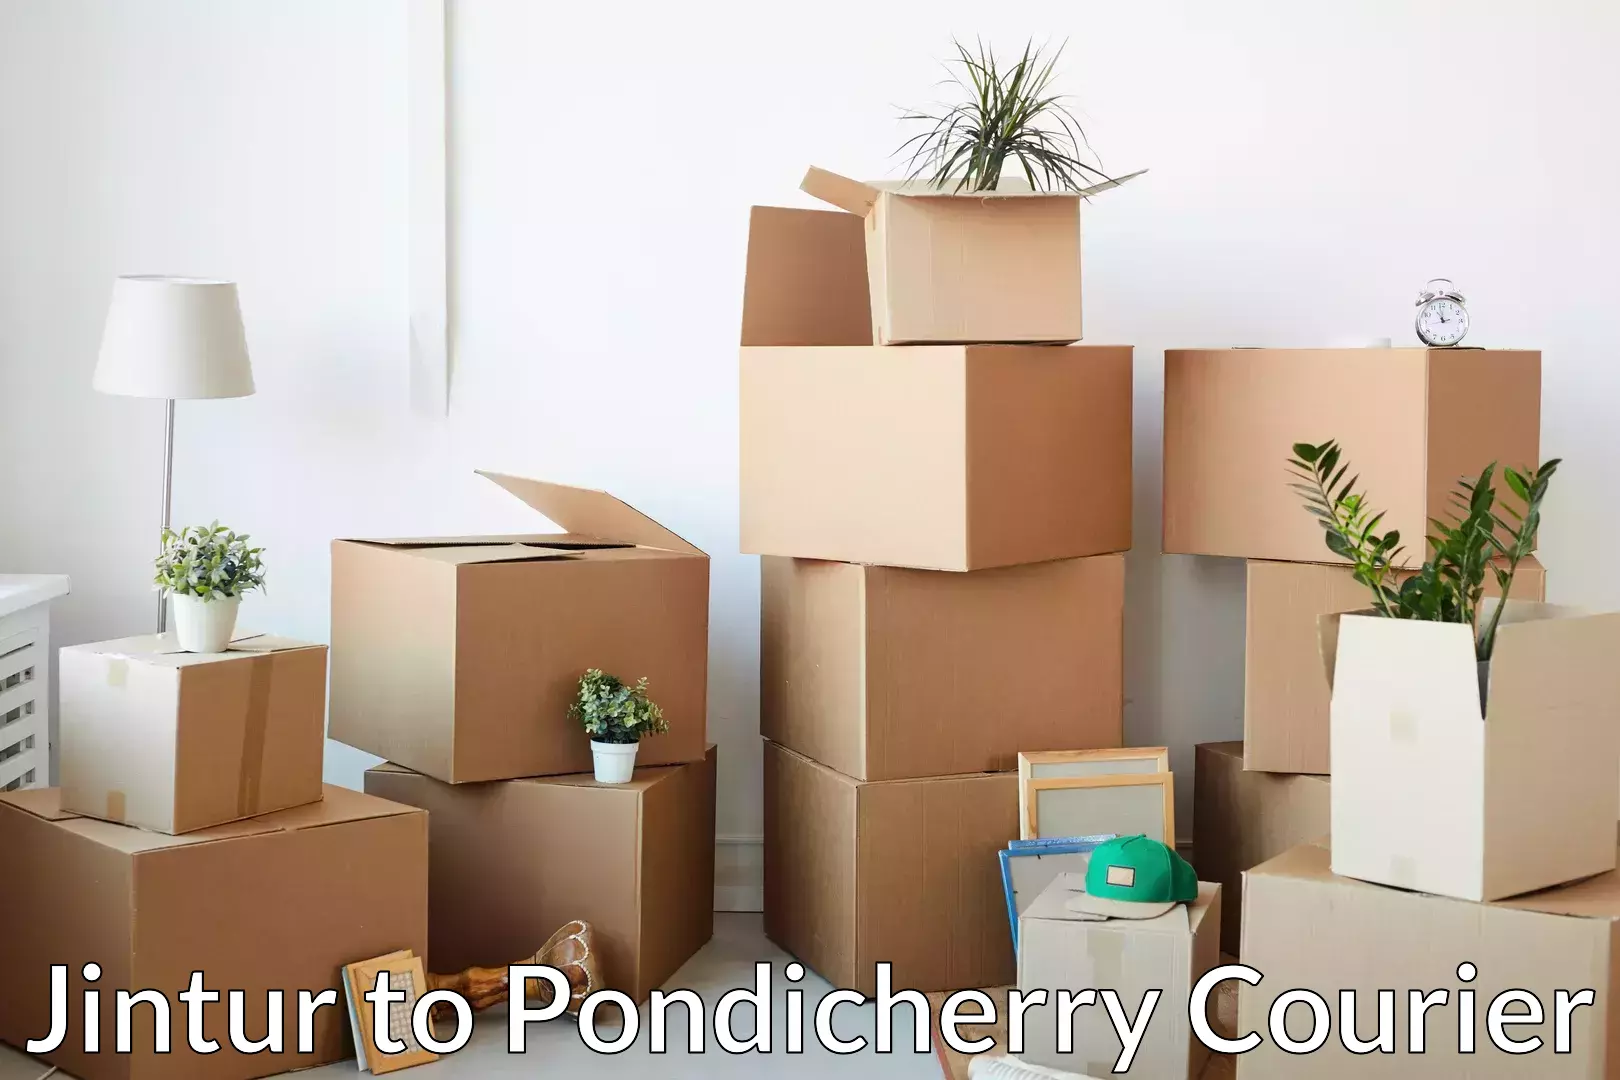 Moving and handling services Jintur to Pondicherry University